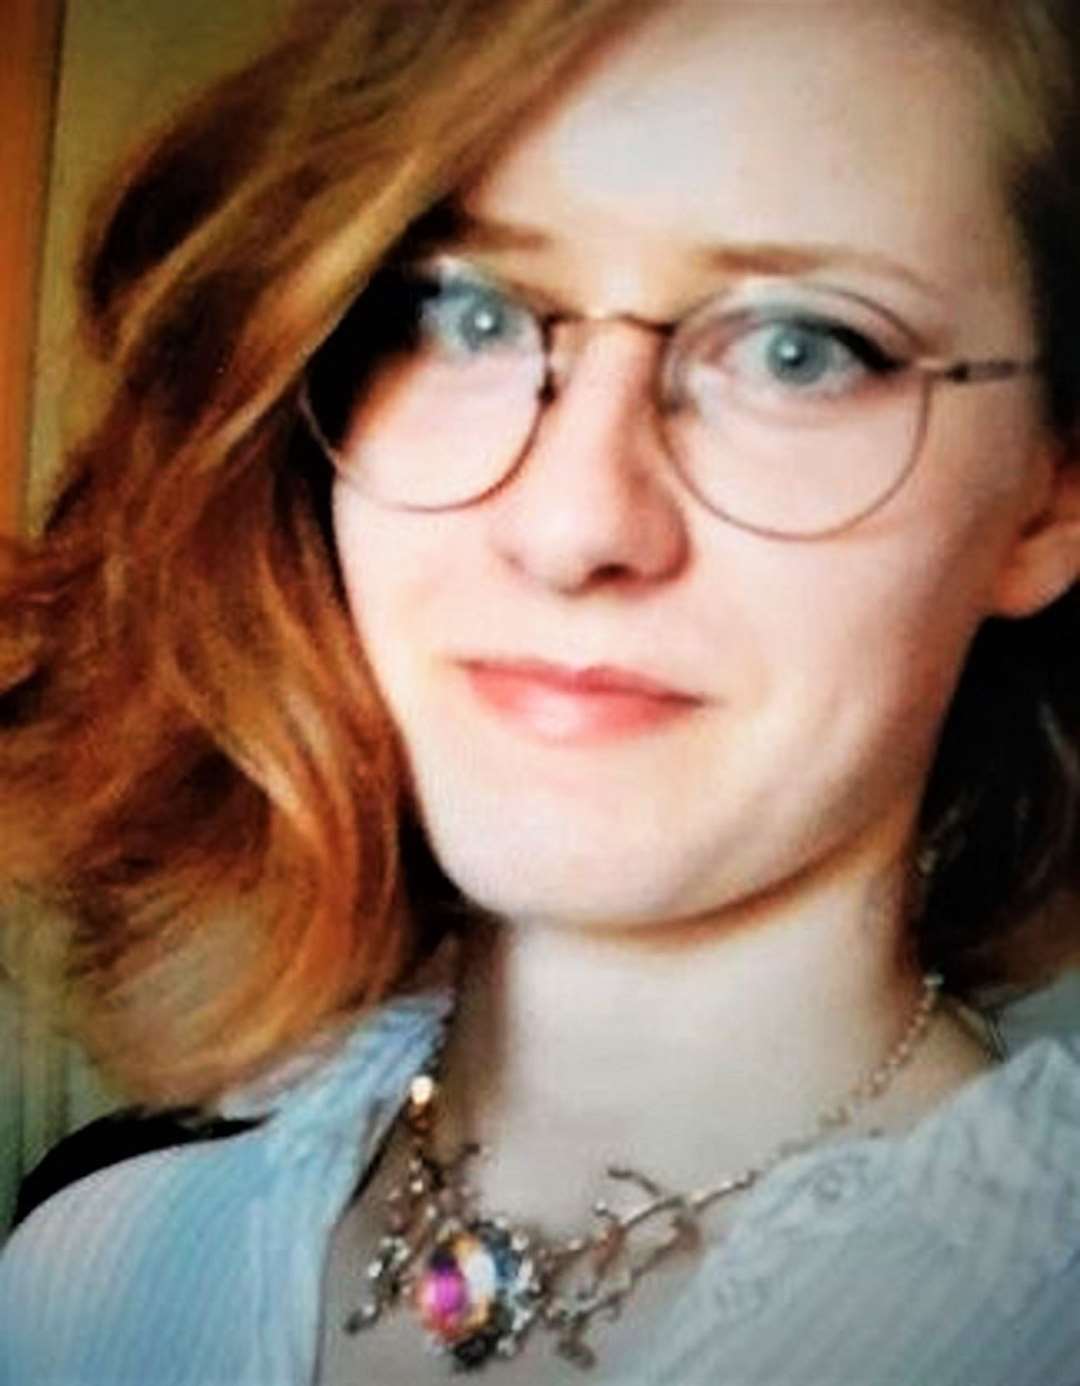 Ella Herrick was reported missing on Wednesday evening.